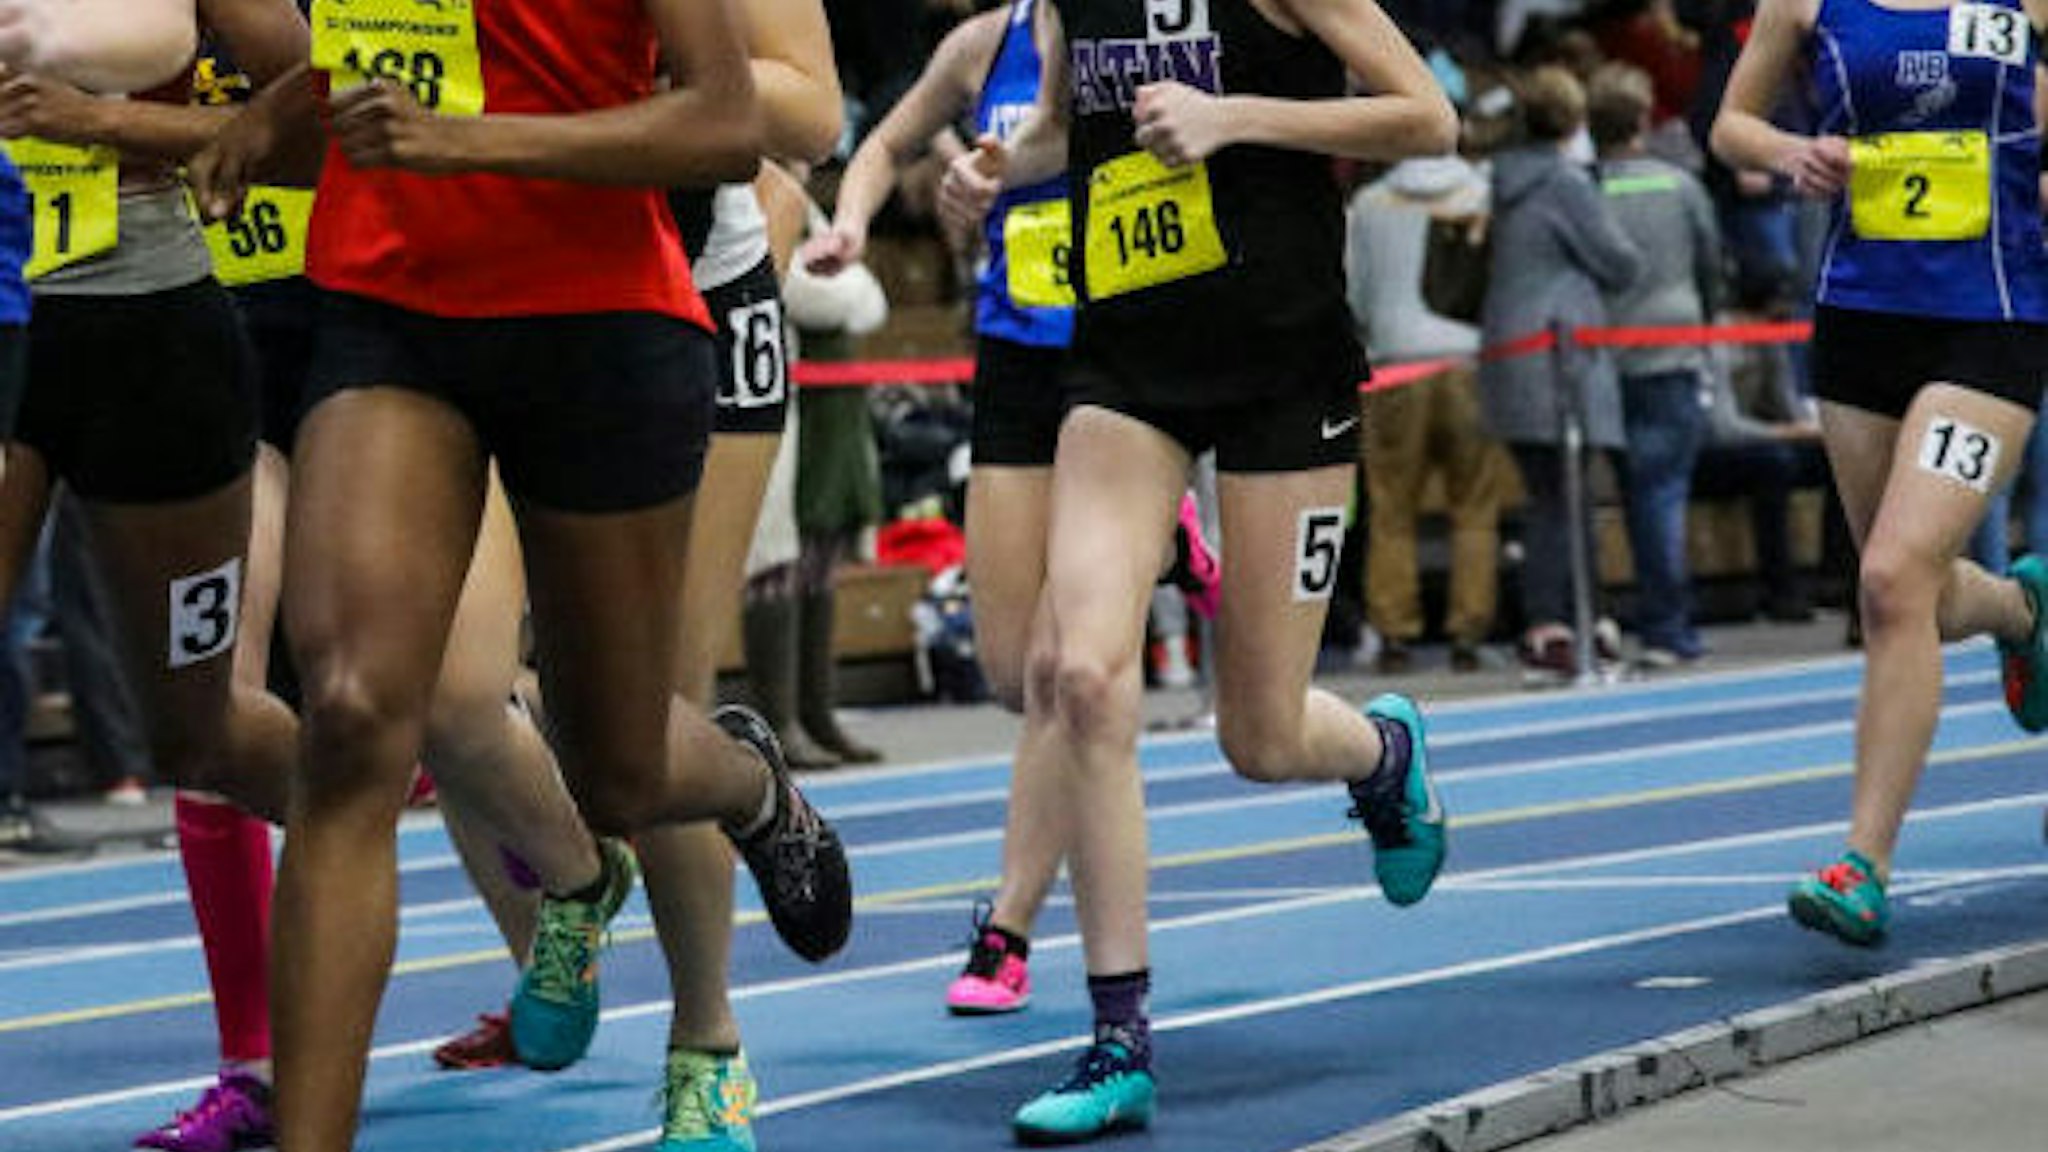 Girls compete in a high school track event.